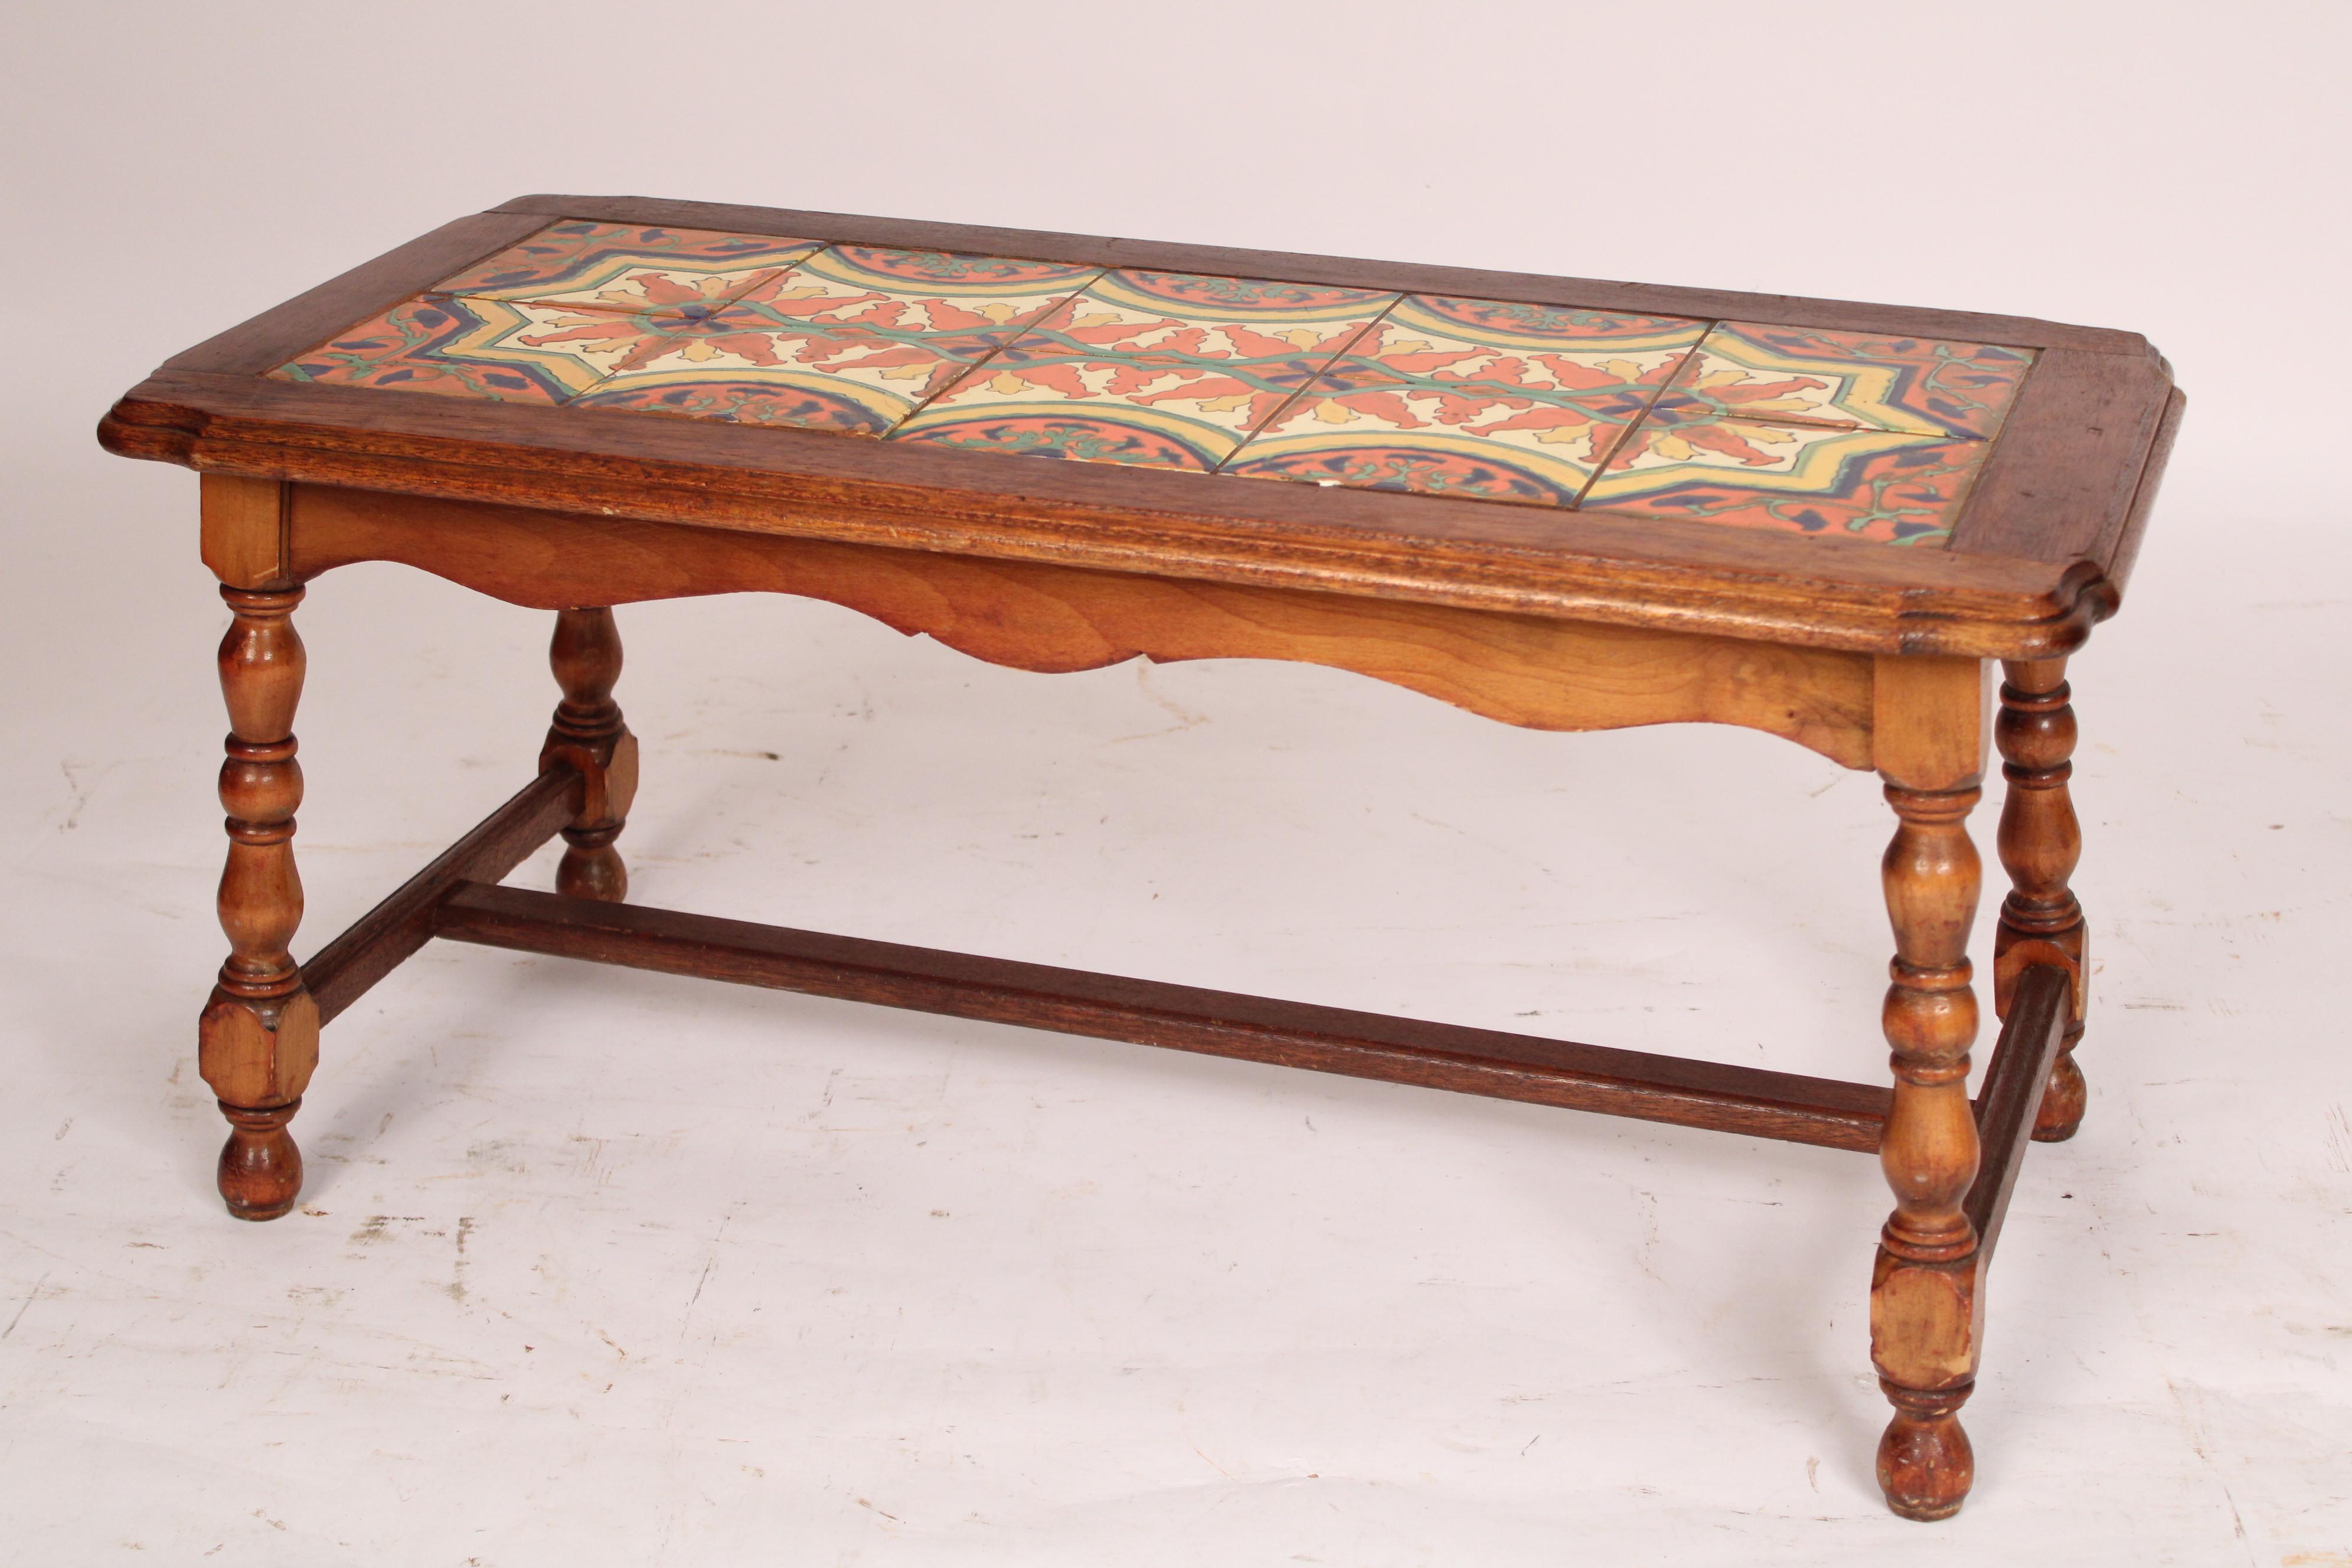 Baroque Tile Top Coffee Table For Sale